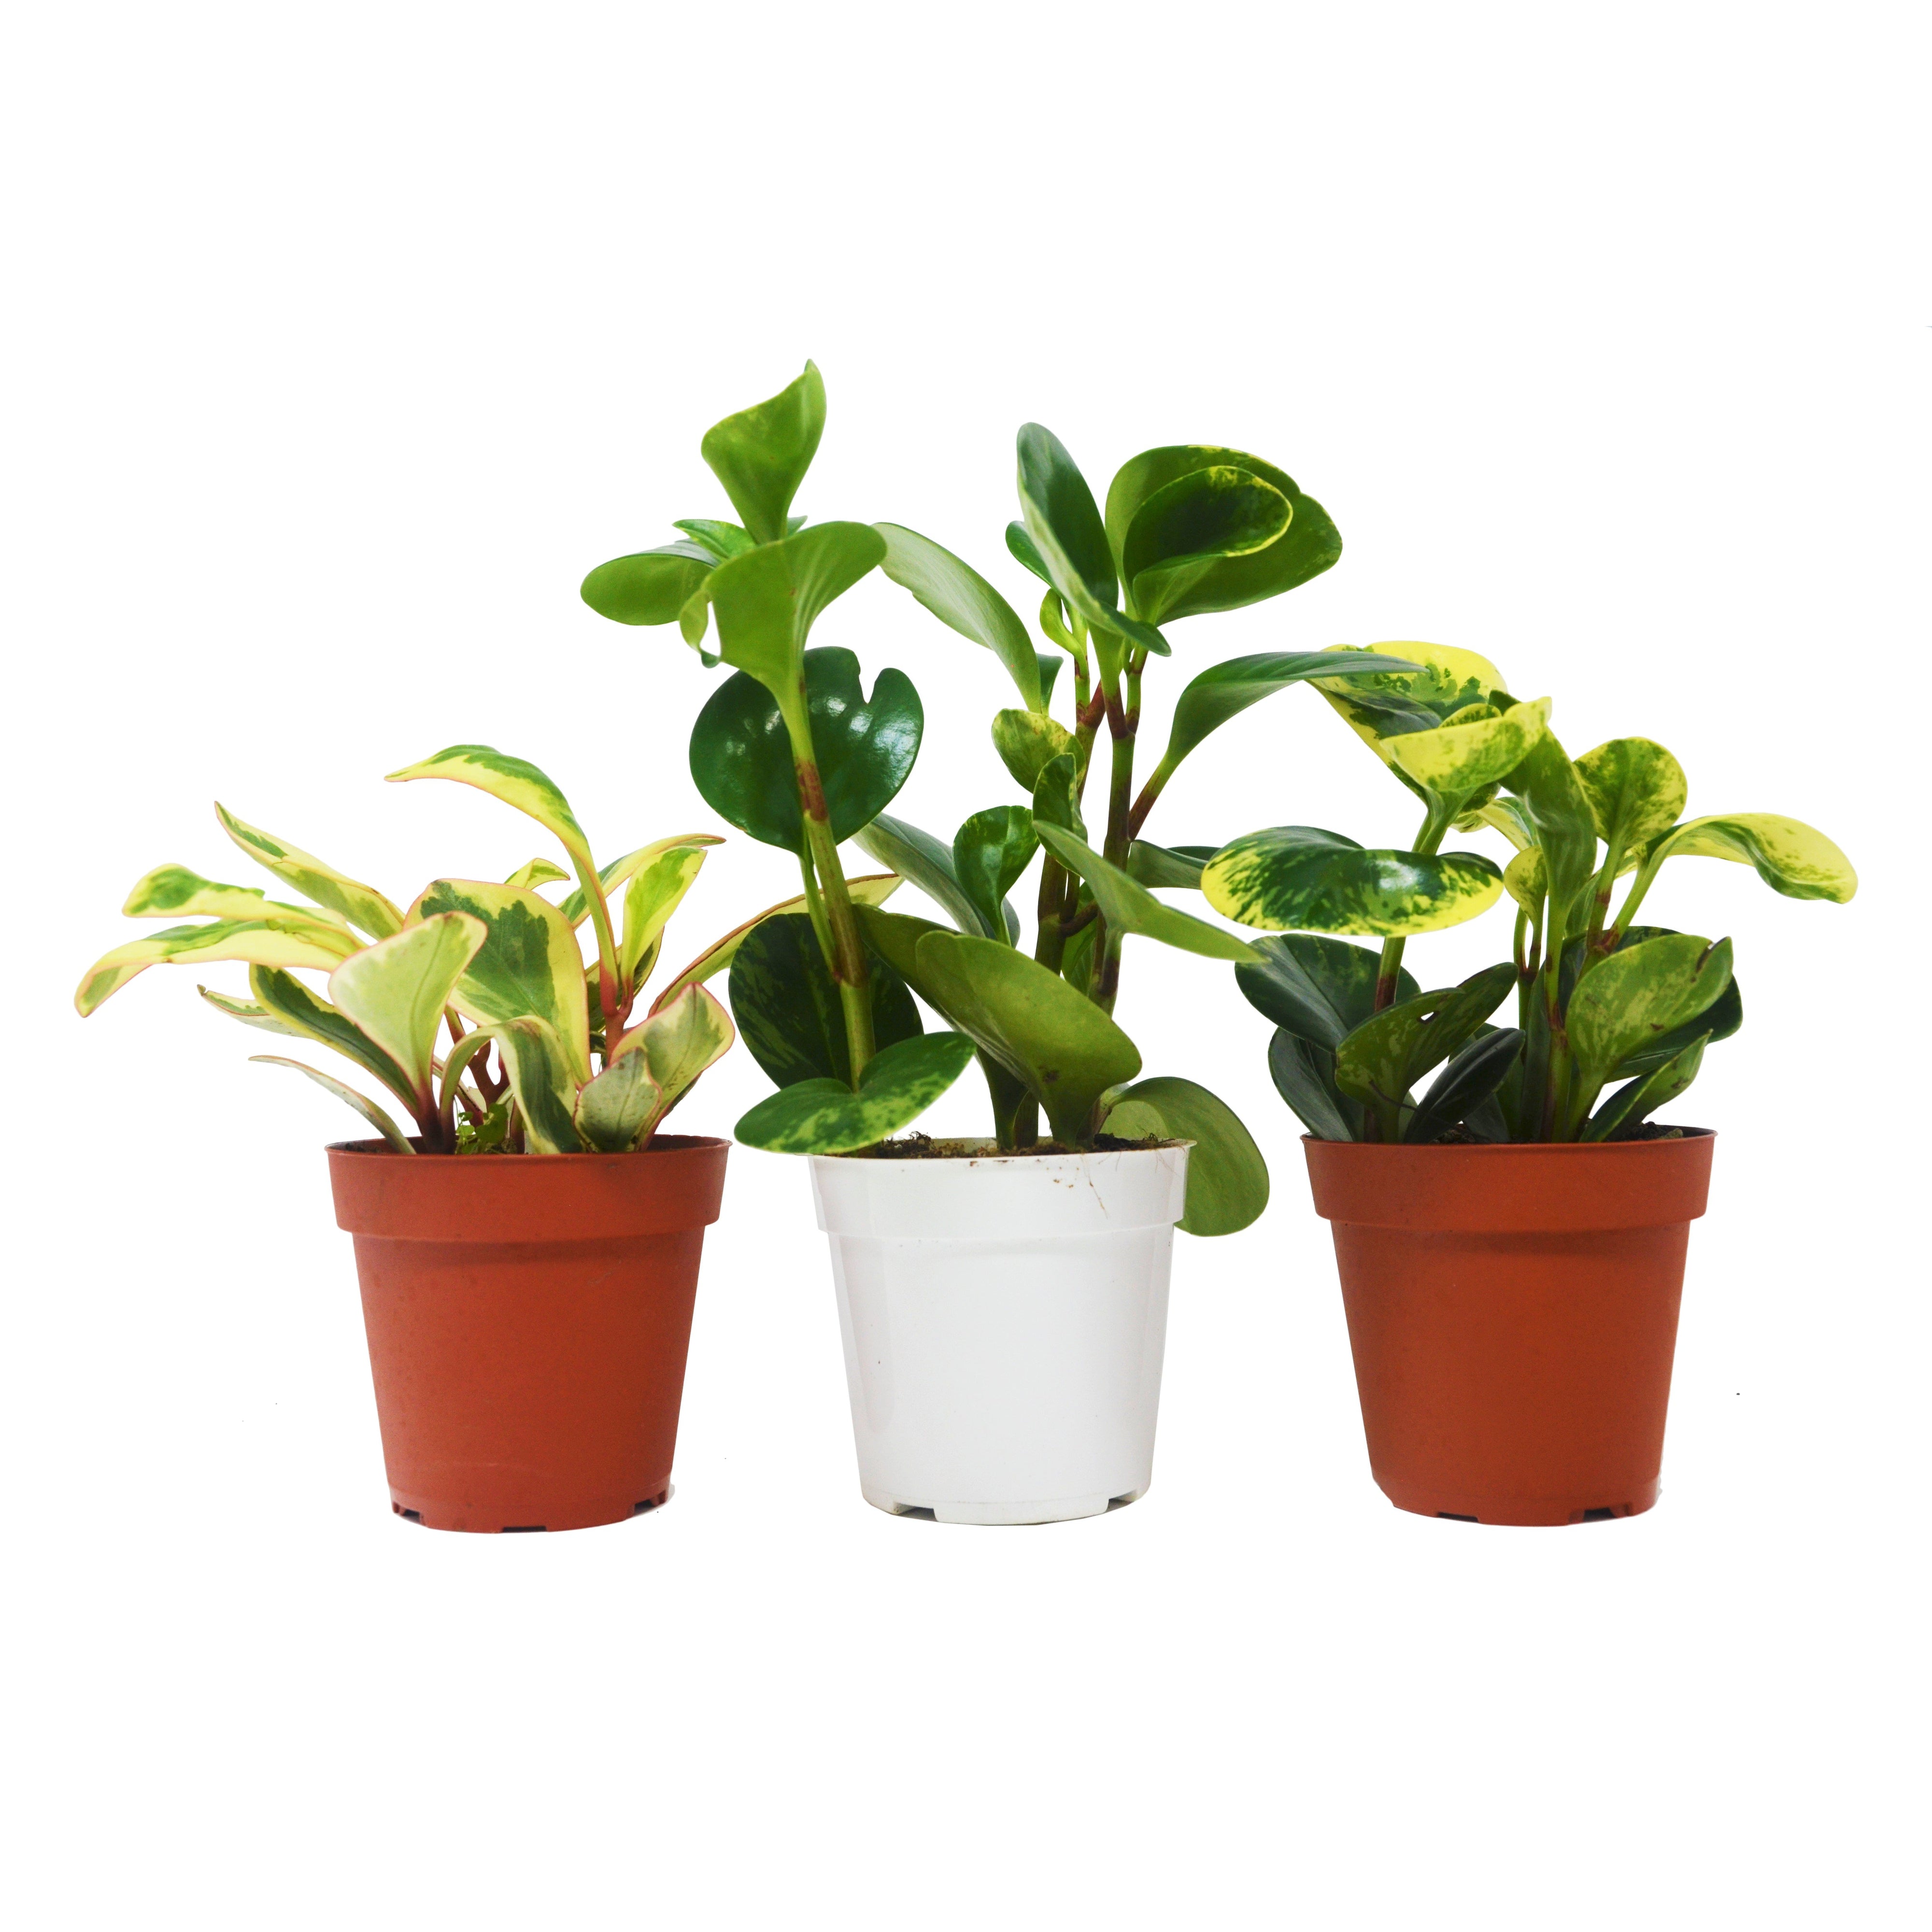 3 Different Peperomia Plants in 4" Pots - Baby Rubber Plants